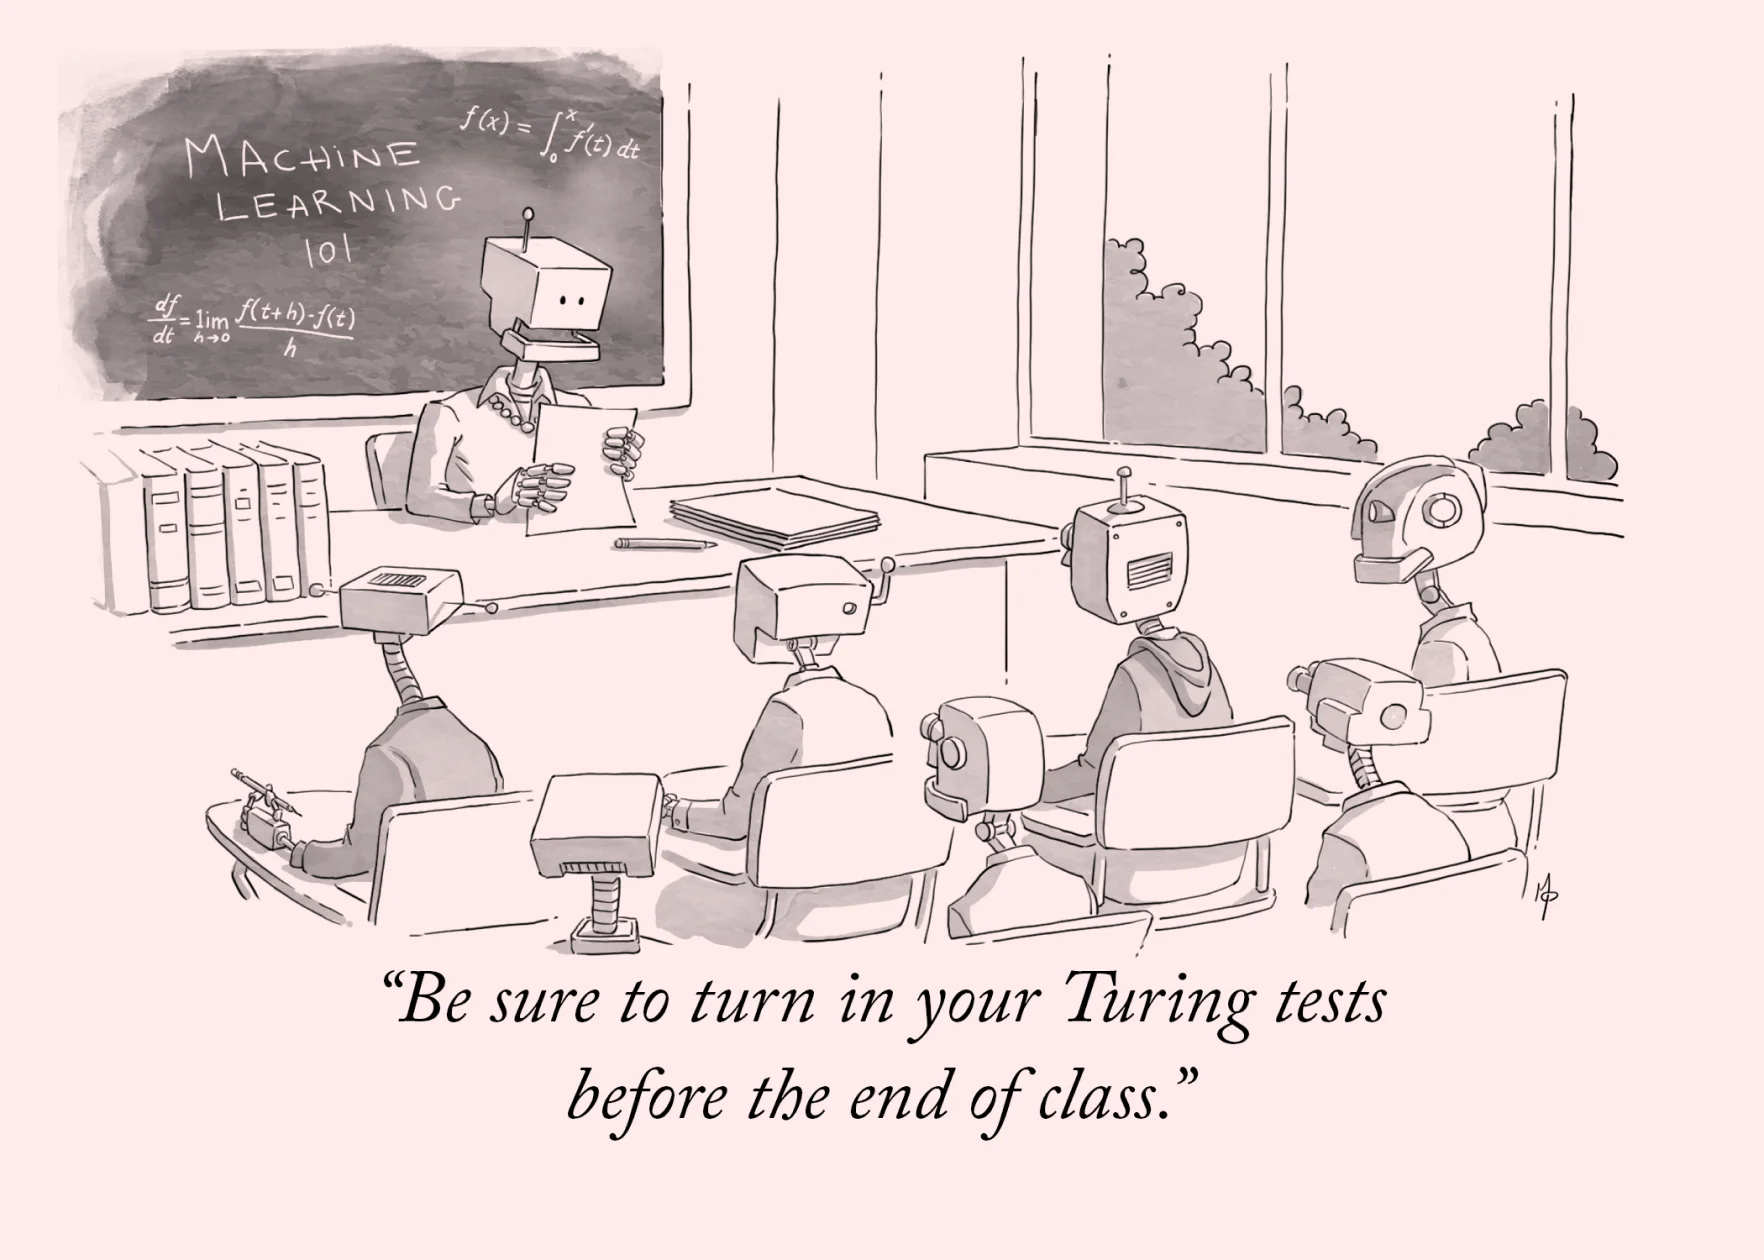 A cartoon-style illustration of a classroom of robots. The teacher robot is speaking to the class. The caption reads: Be sure to turn in your Turing tests before the end of class.